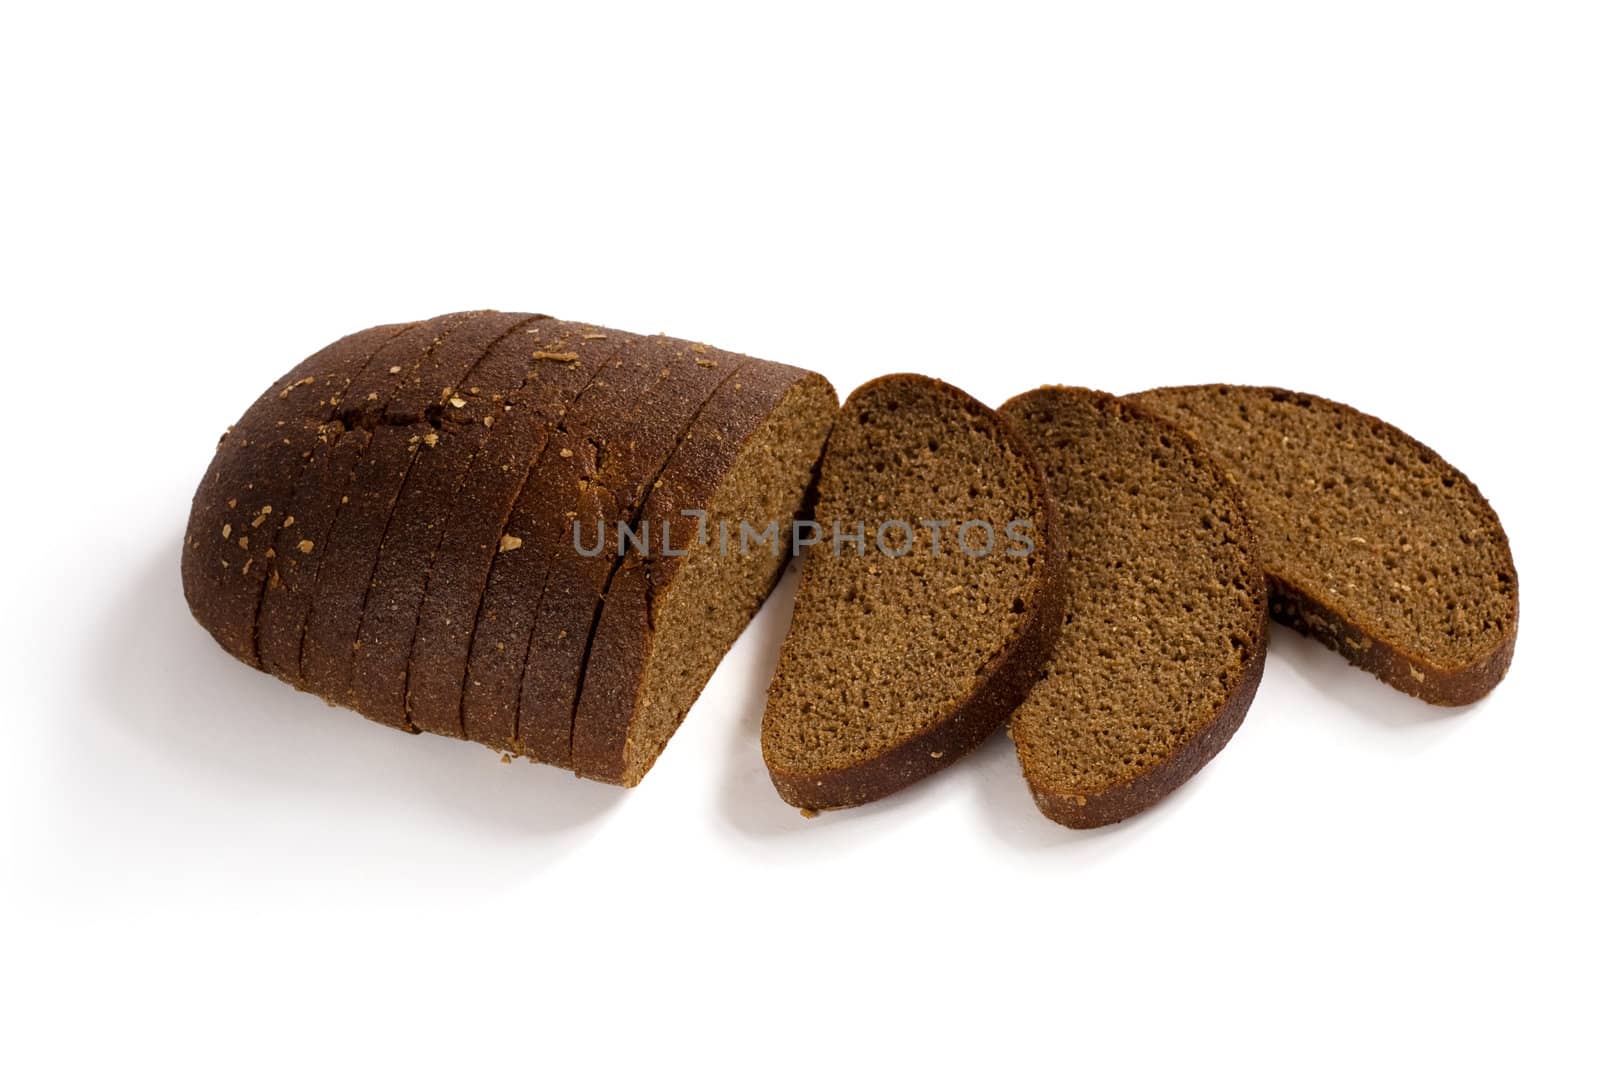 Sliced brown rye bread by ints